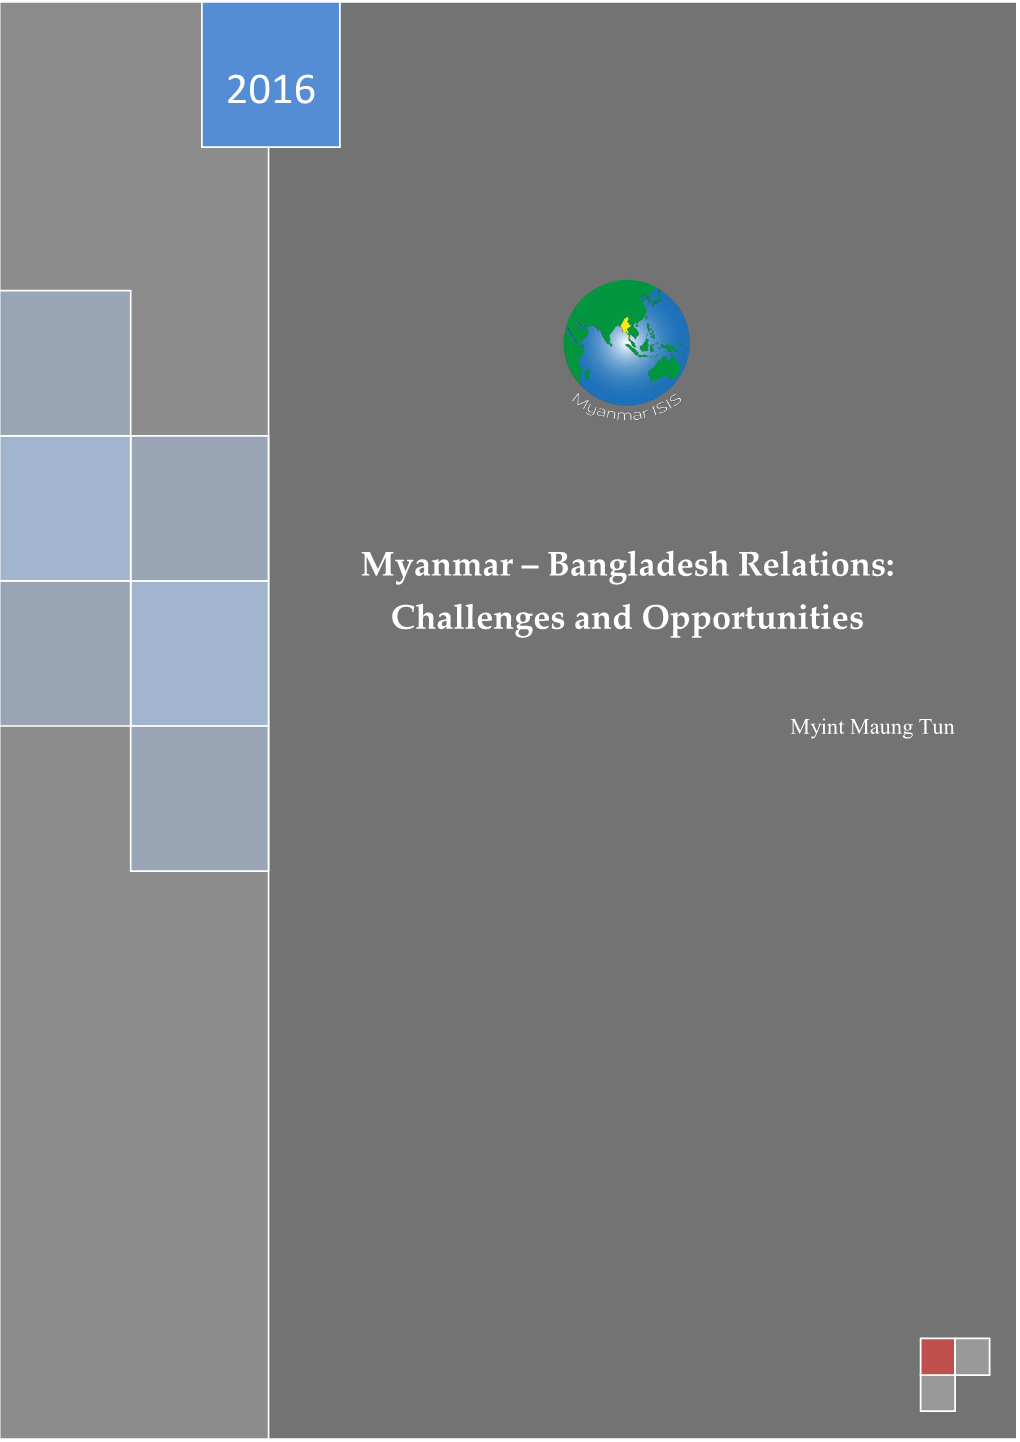 Bangladesh Relations: Challenges and Opportunities